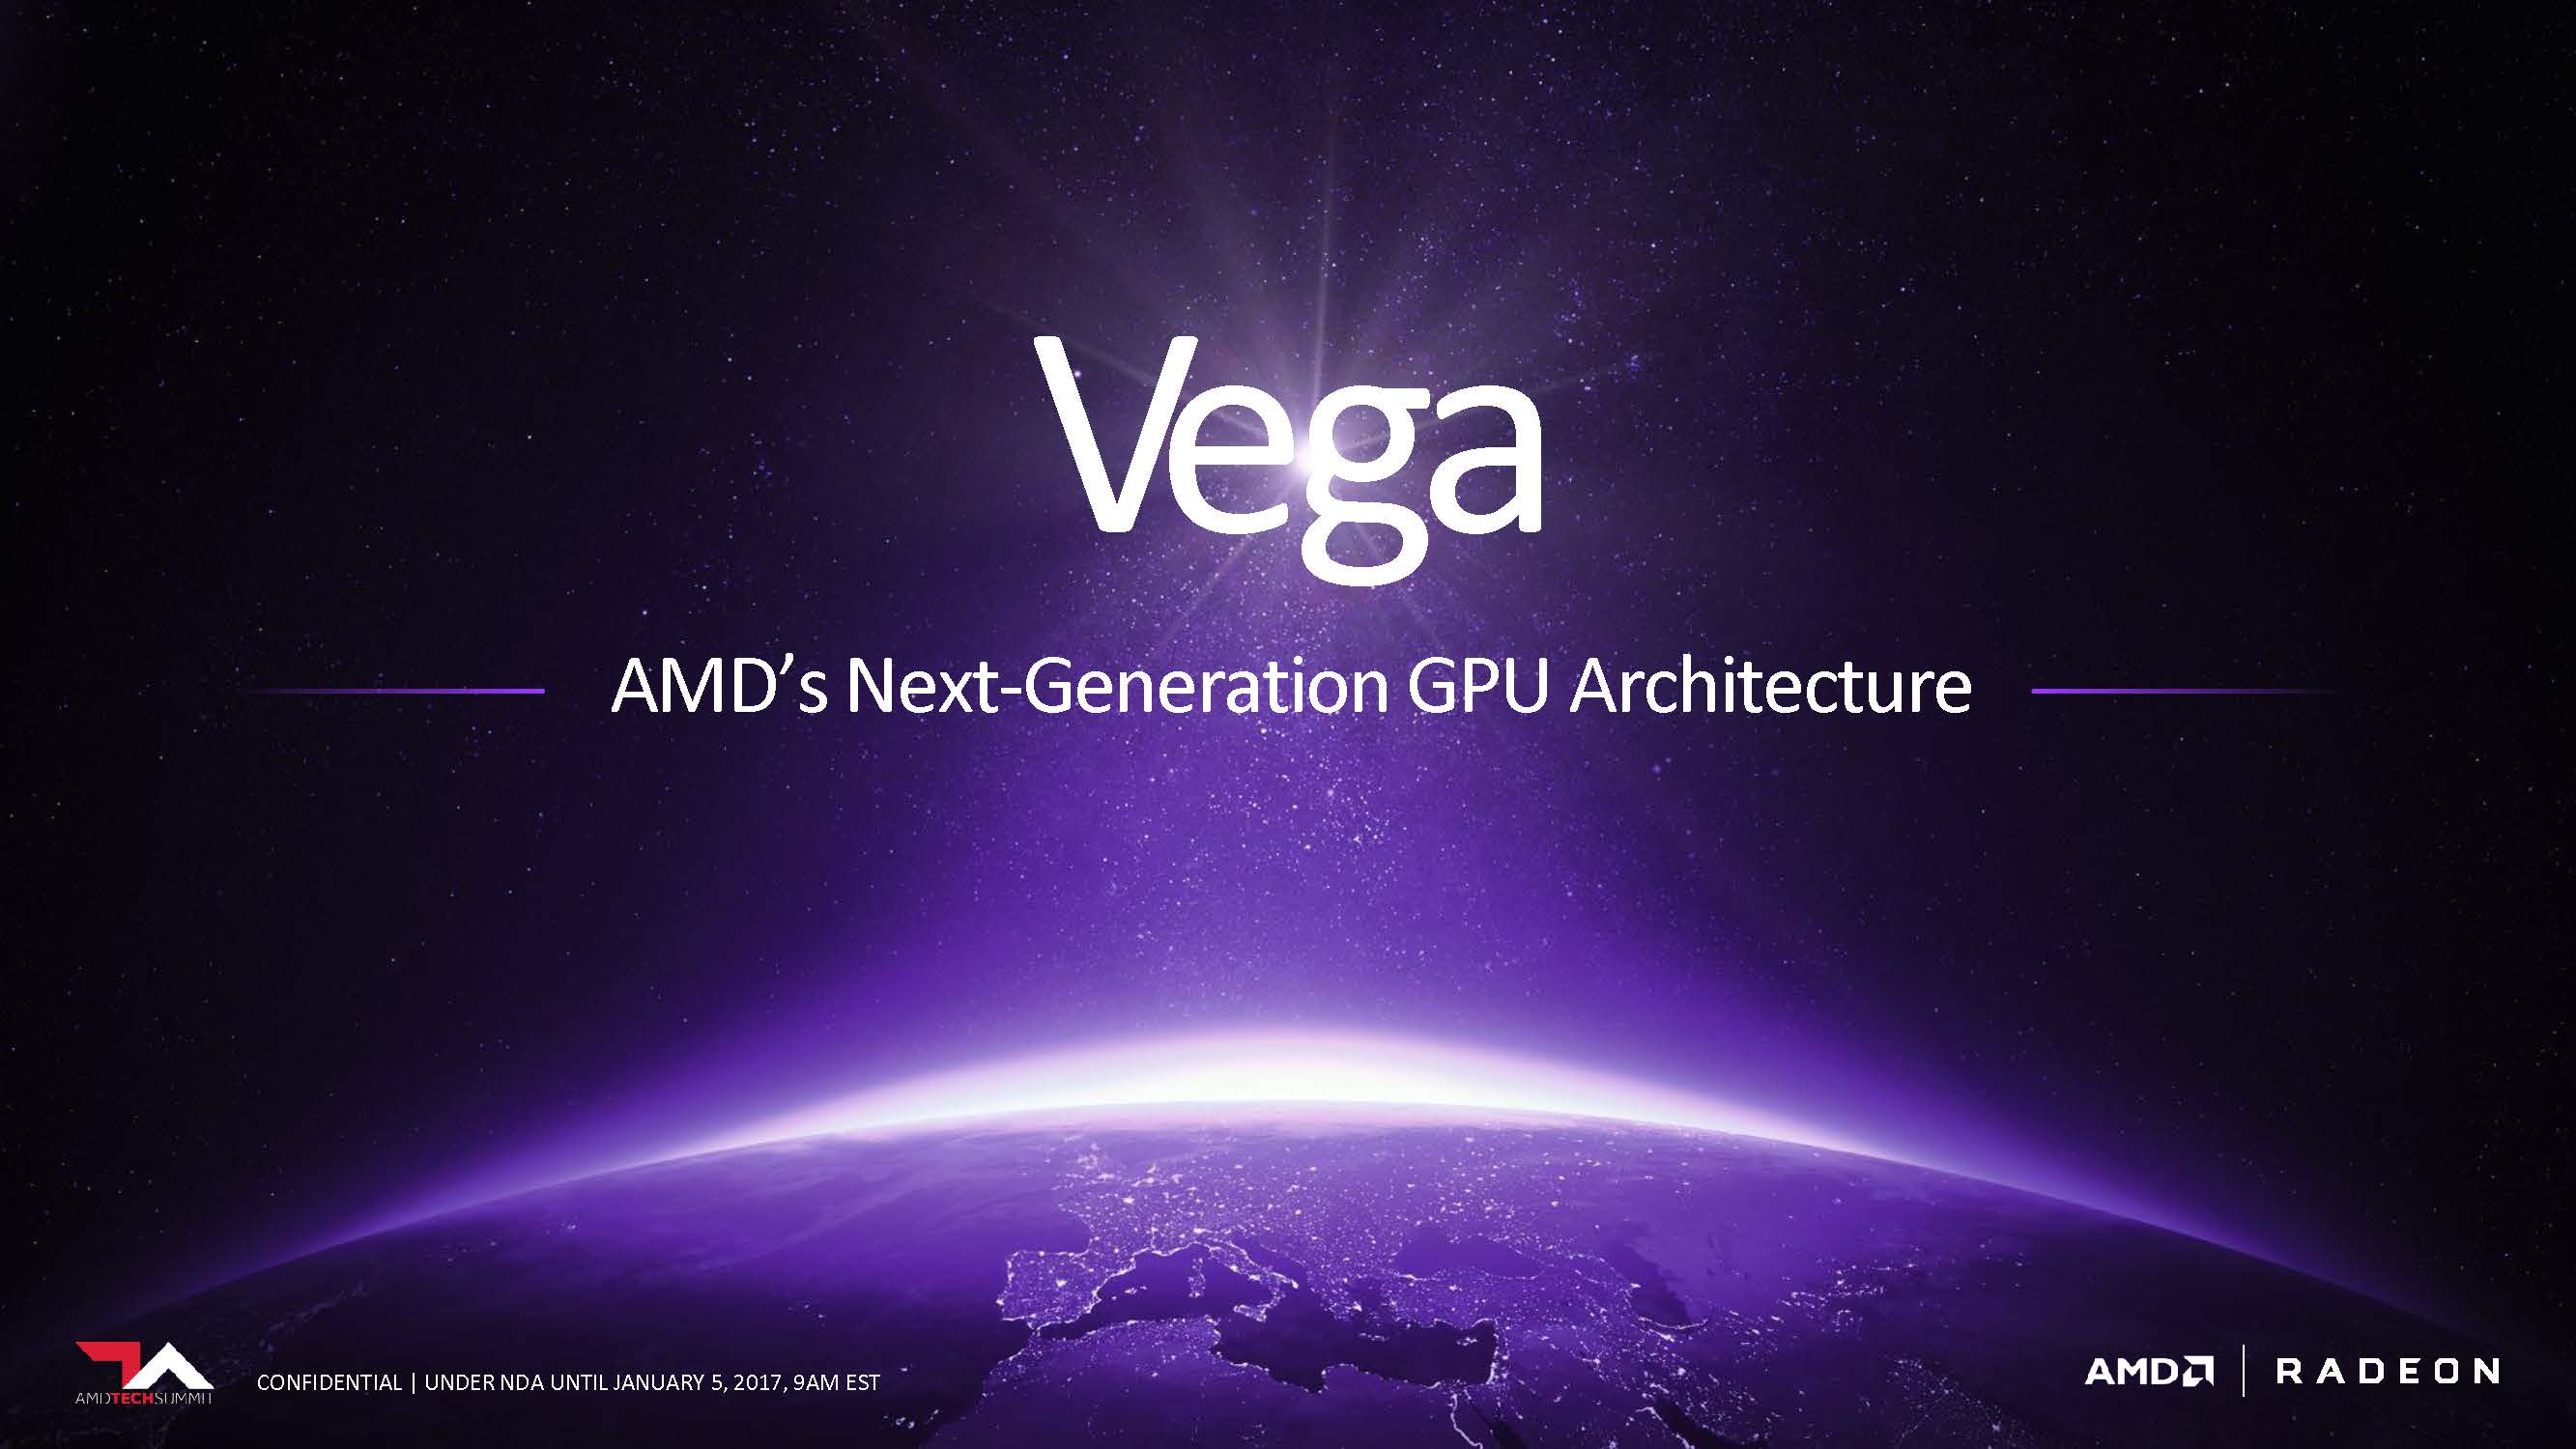 AMD Radeon RX Vega GPU Benchmarks Leaked, Outperforms GTX 1080 in OpenCL Performance